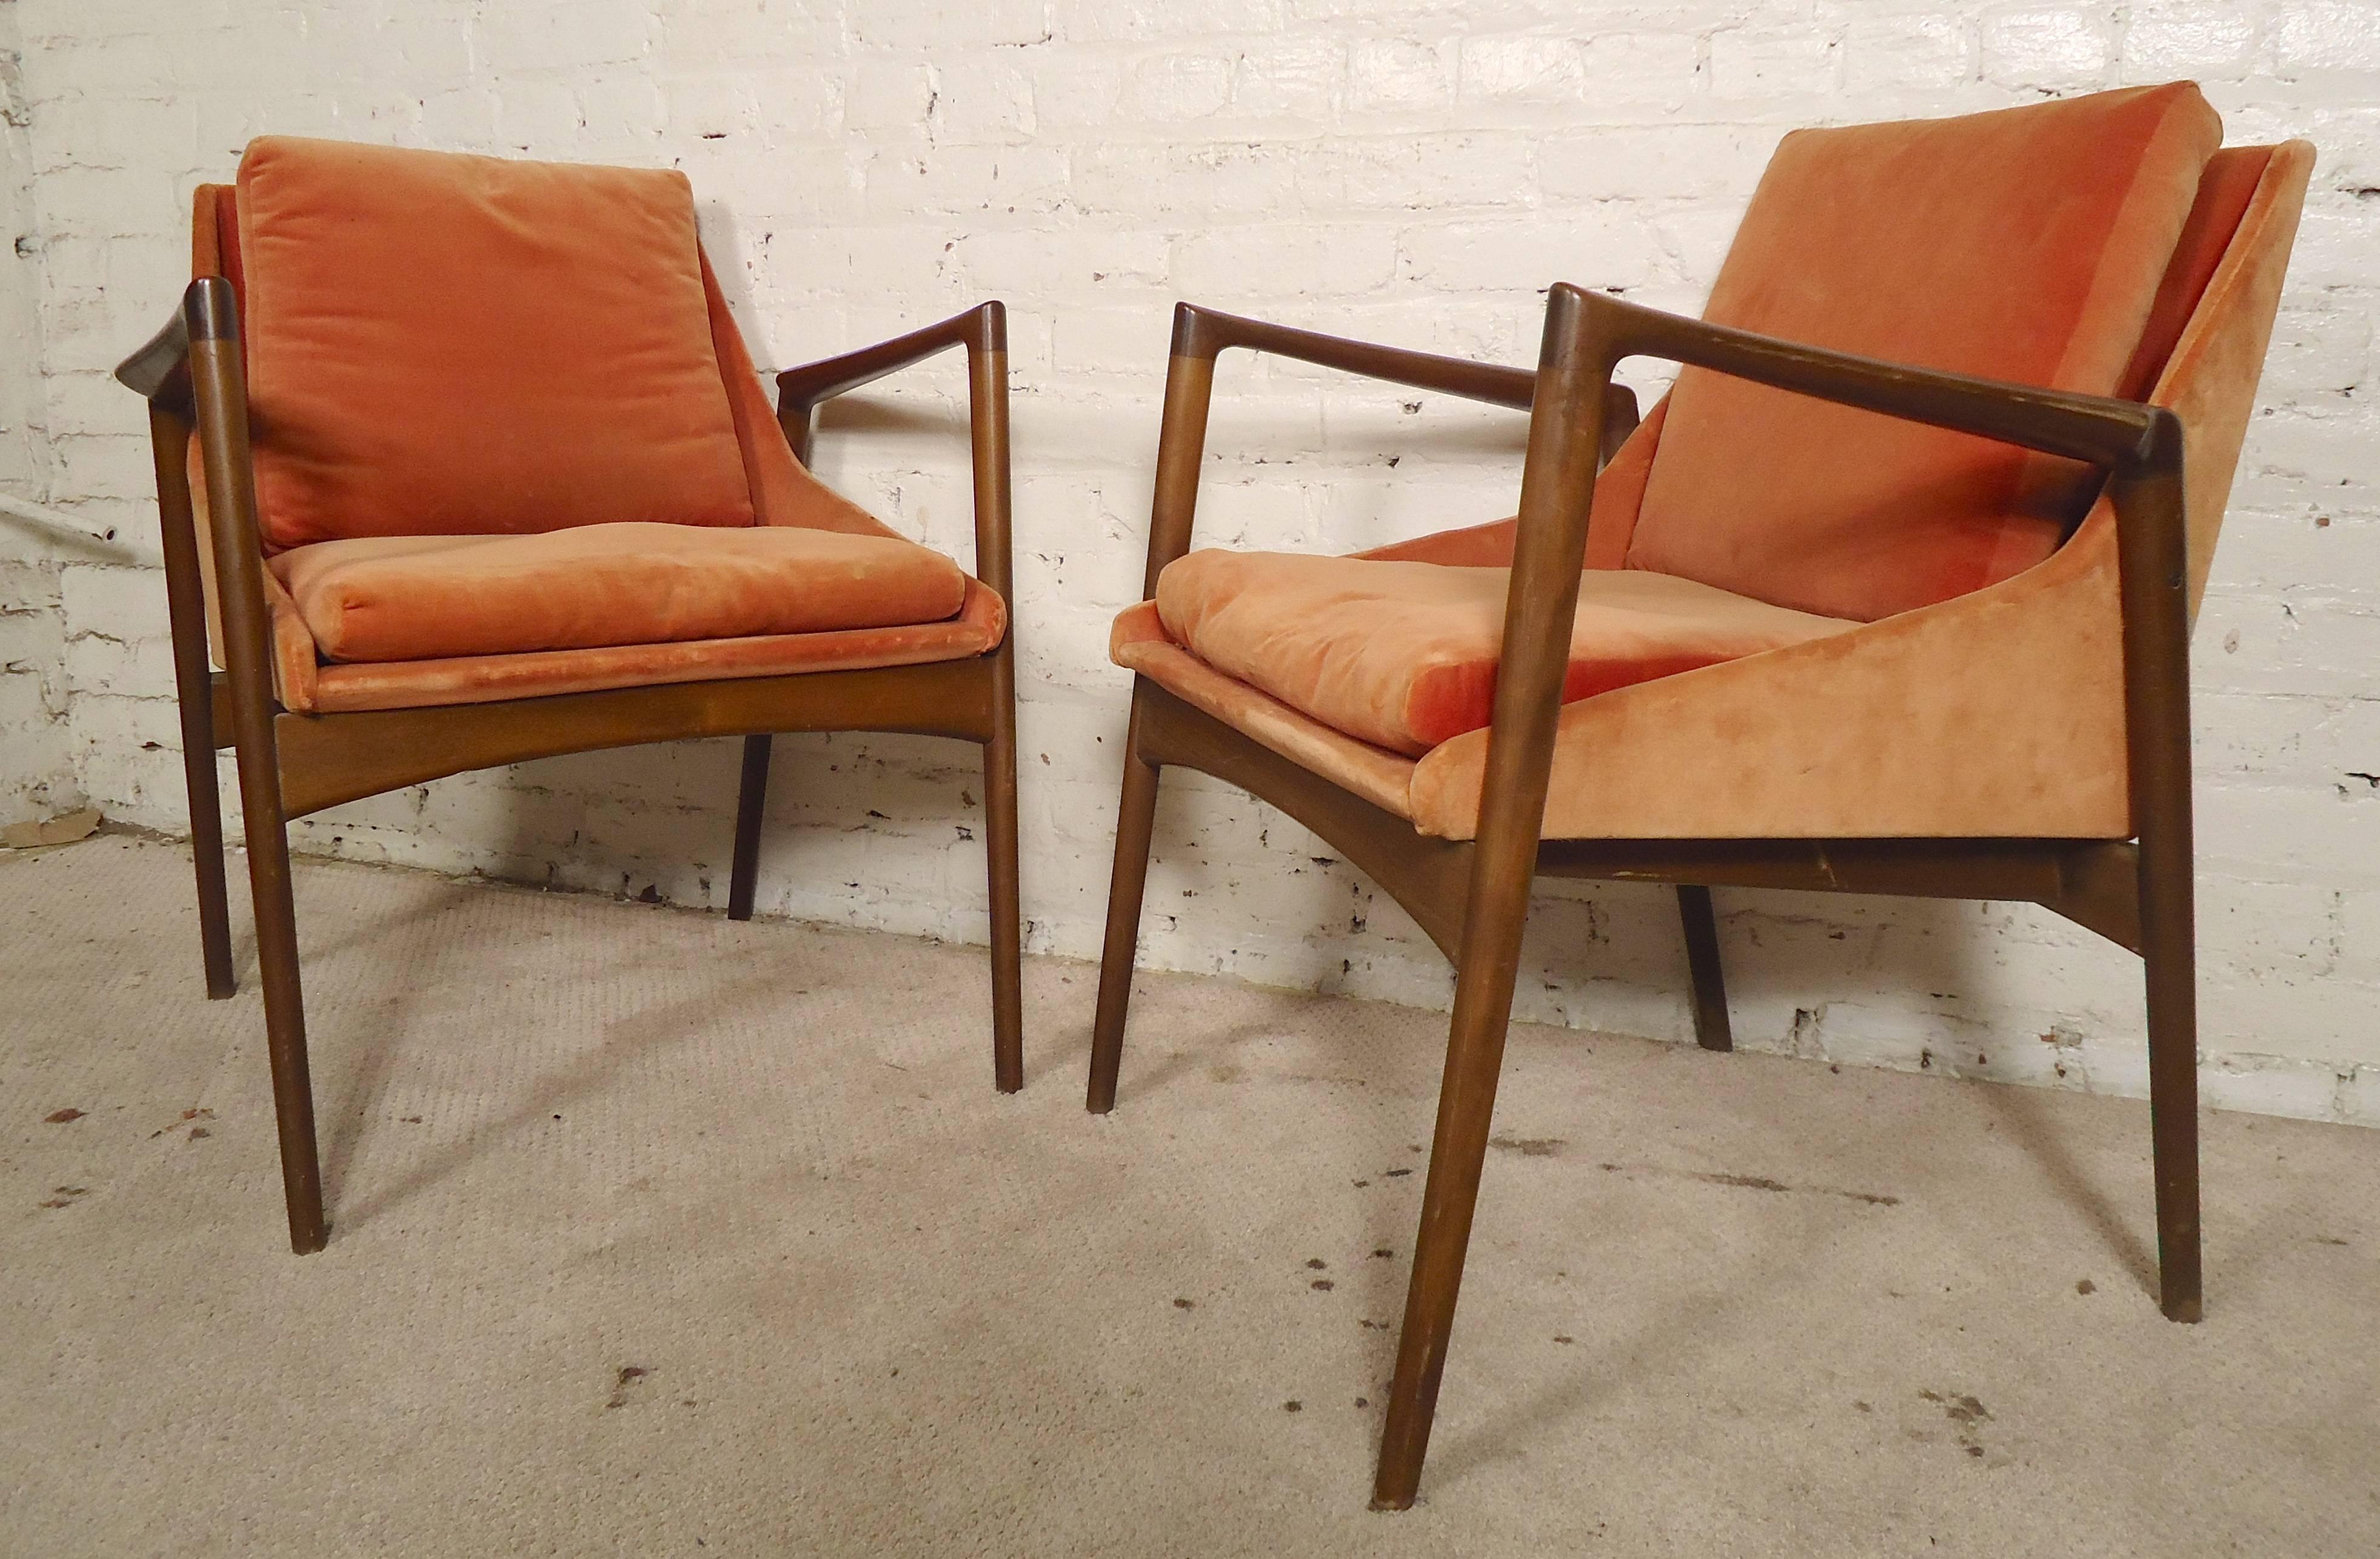 Beautiful mid-century modern arm chairs designed by Kofod-Larsen for Selig. Great sculpted arms and wood frames with bucket style seats.

(Please confirm item location - NY or NJ - with dealer)